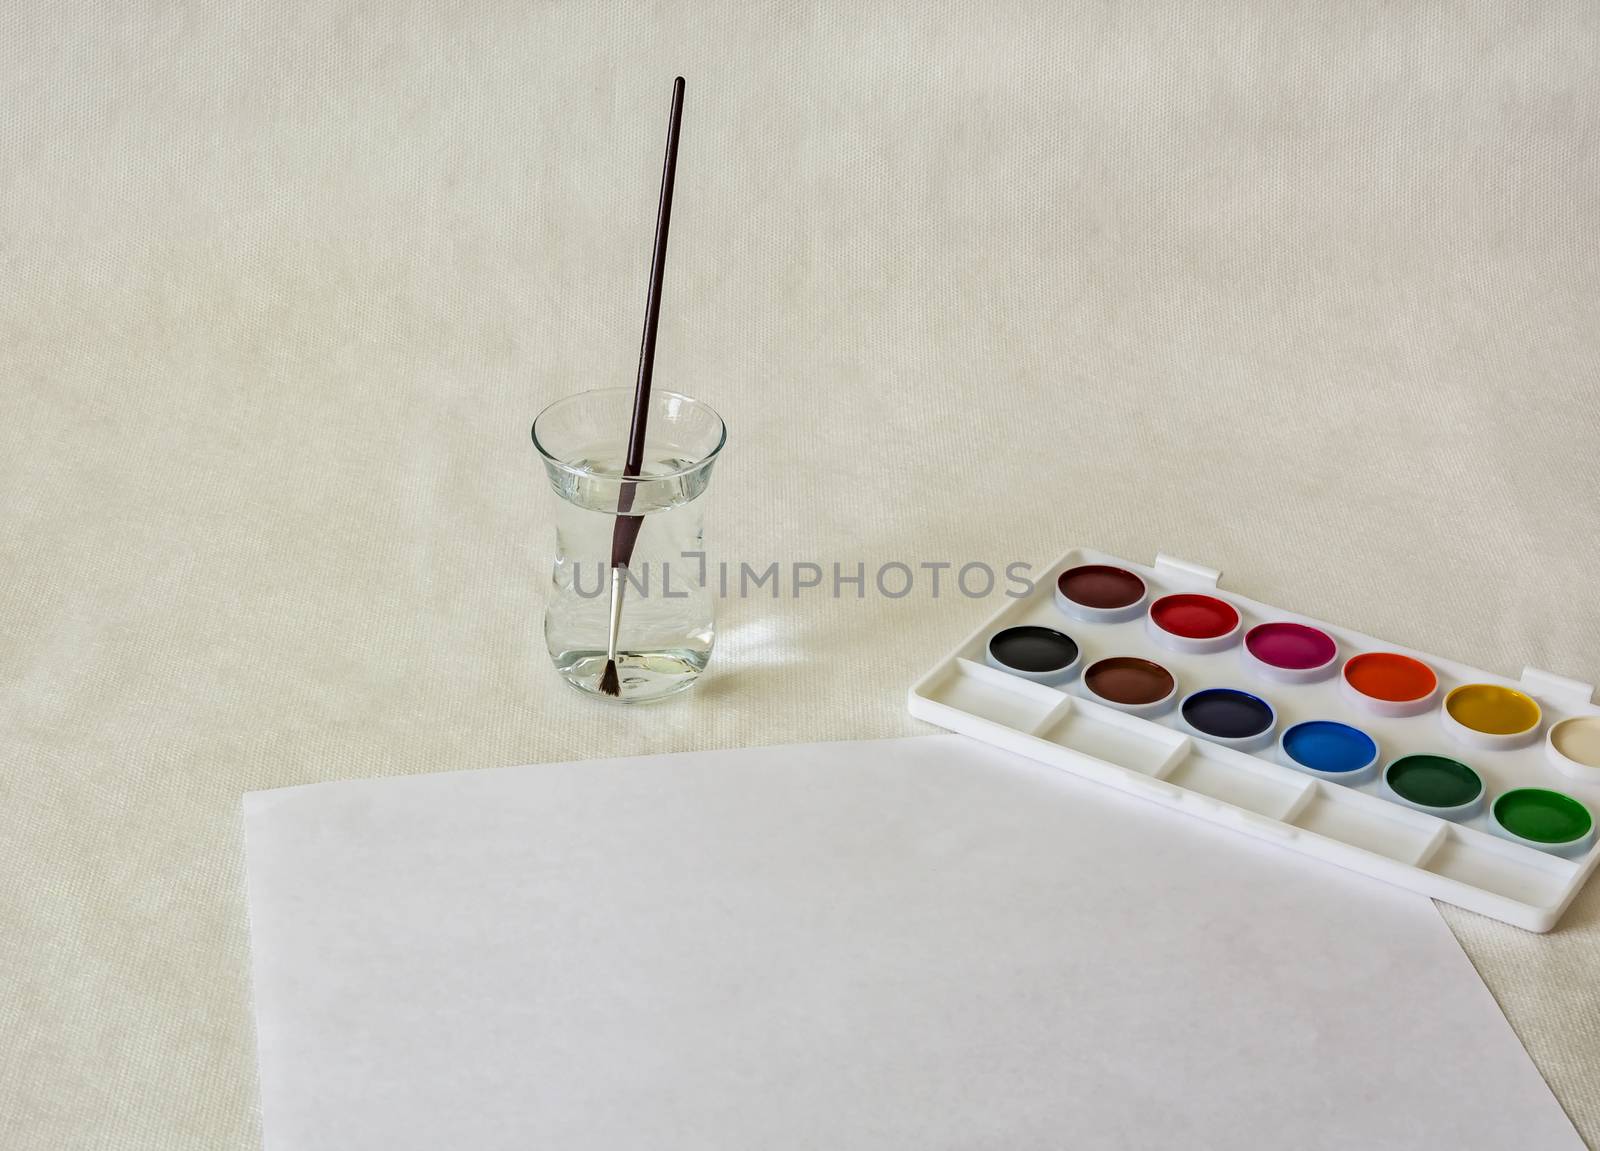 On a light surface there is a set of watercolor paints and there is a glass with water and a brush